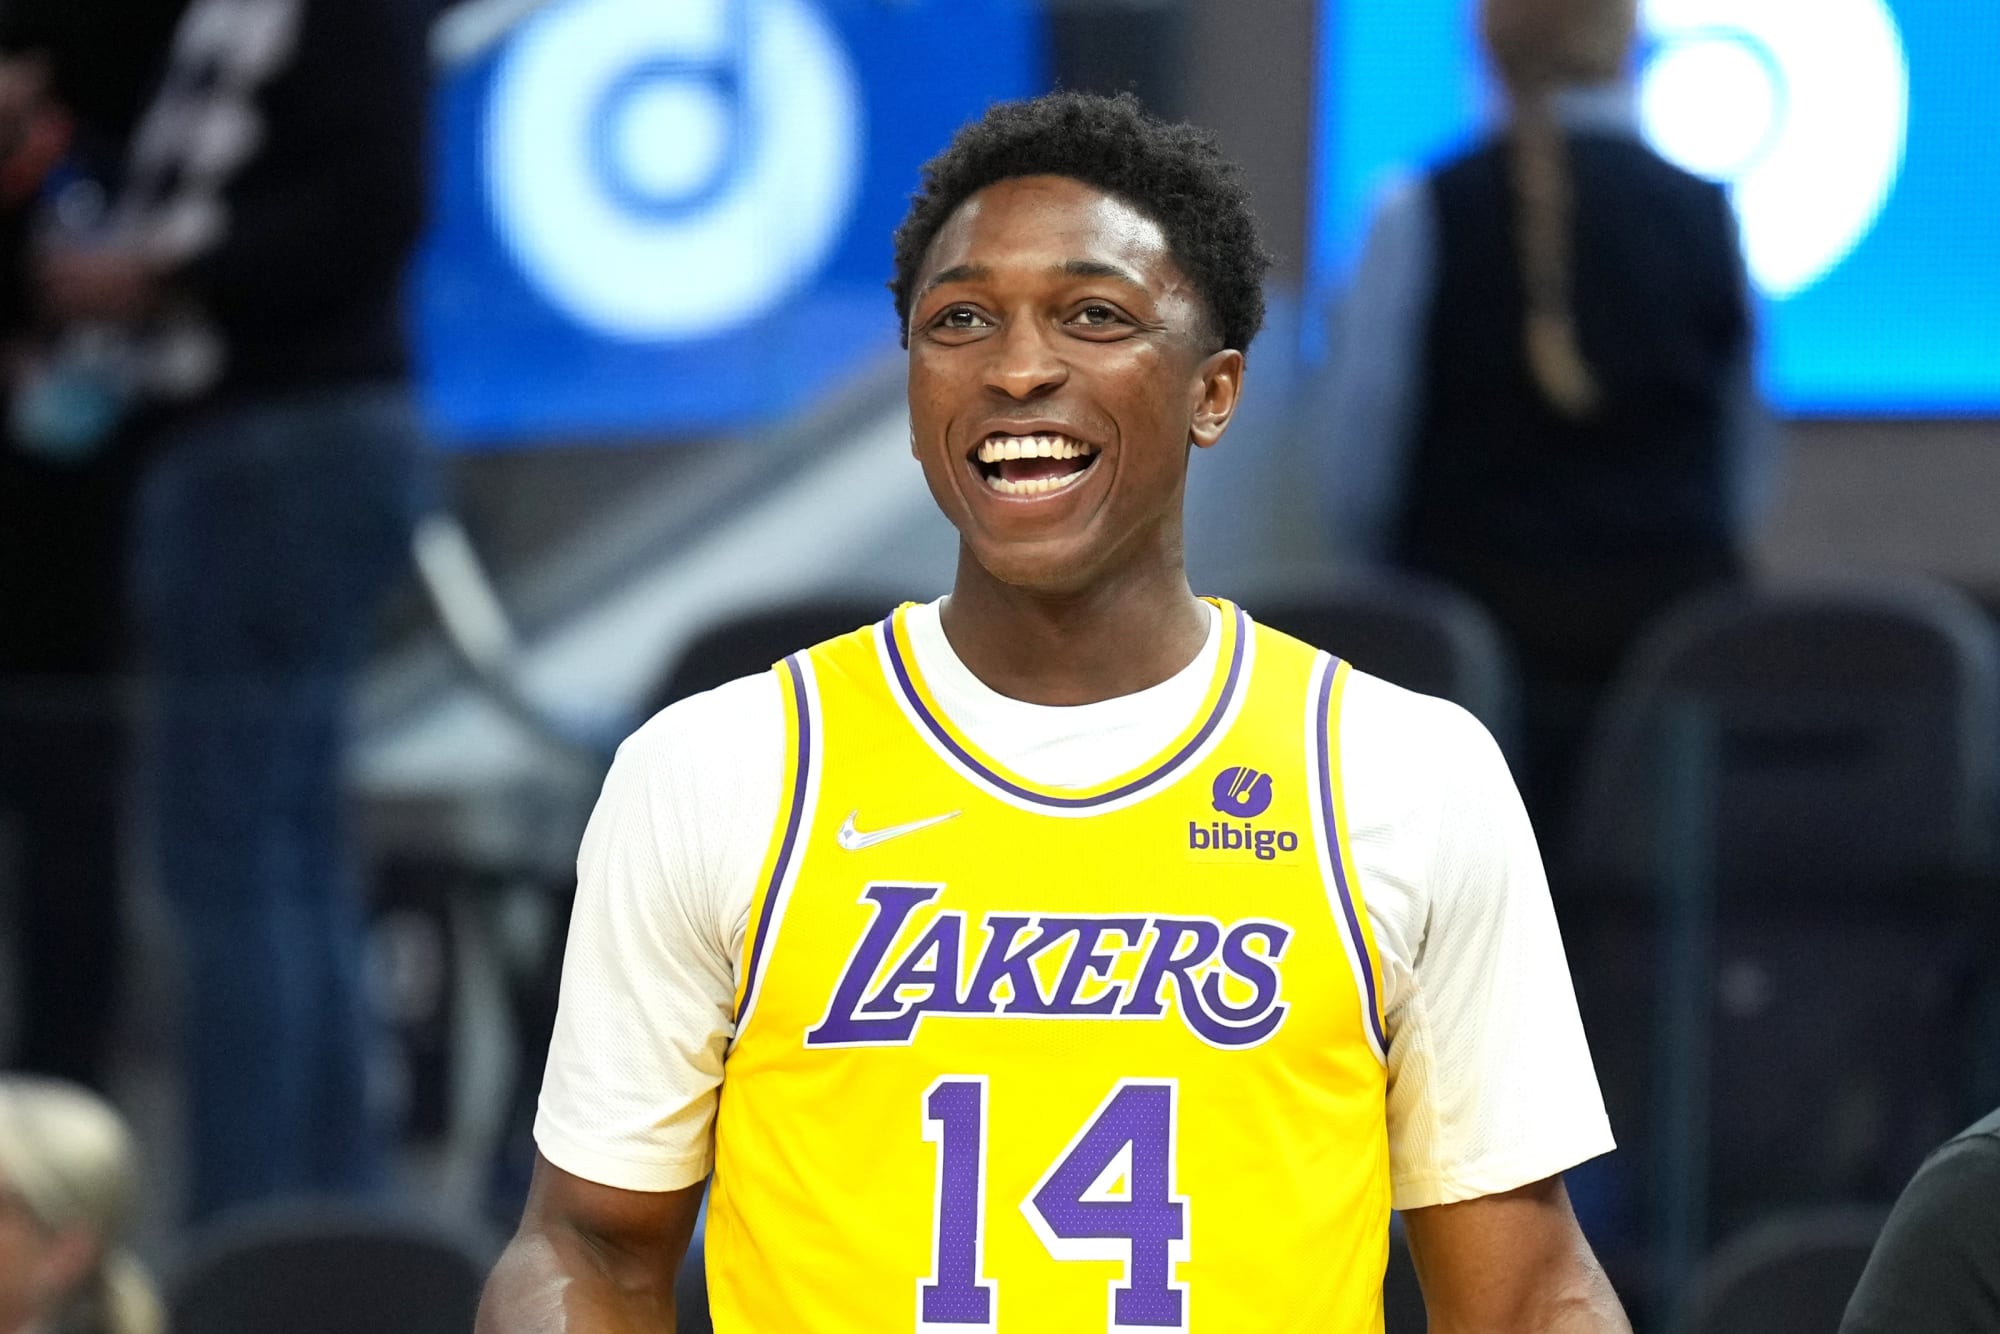 Stanley Johnson is the next great Los Angeles Lakers forward - Page 3